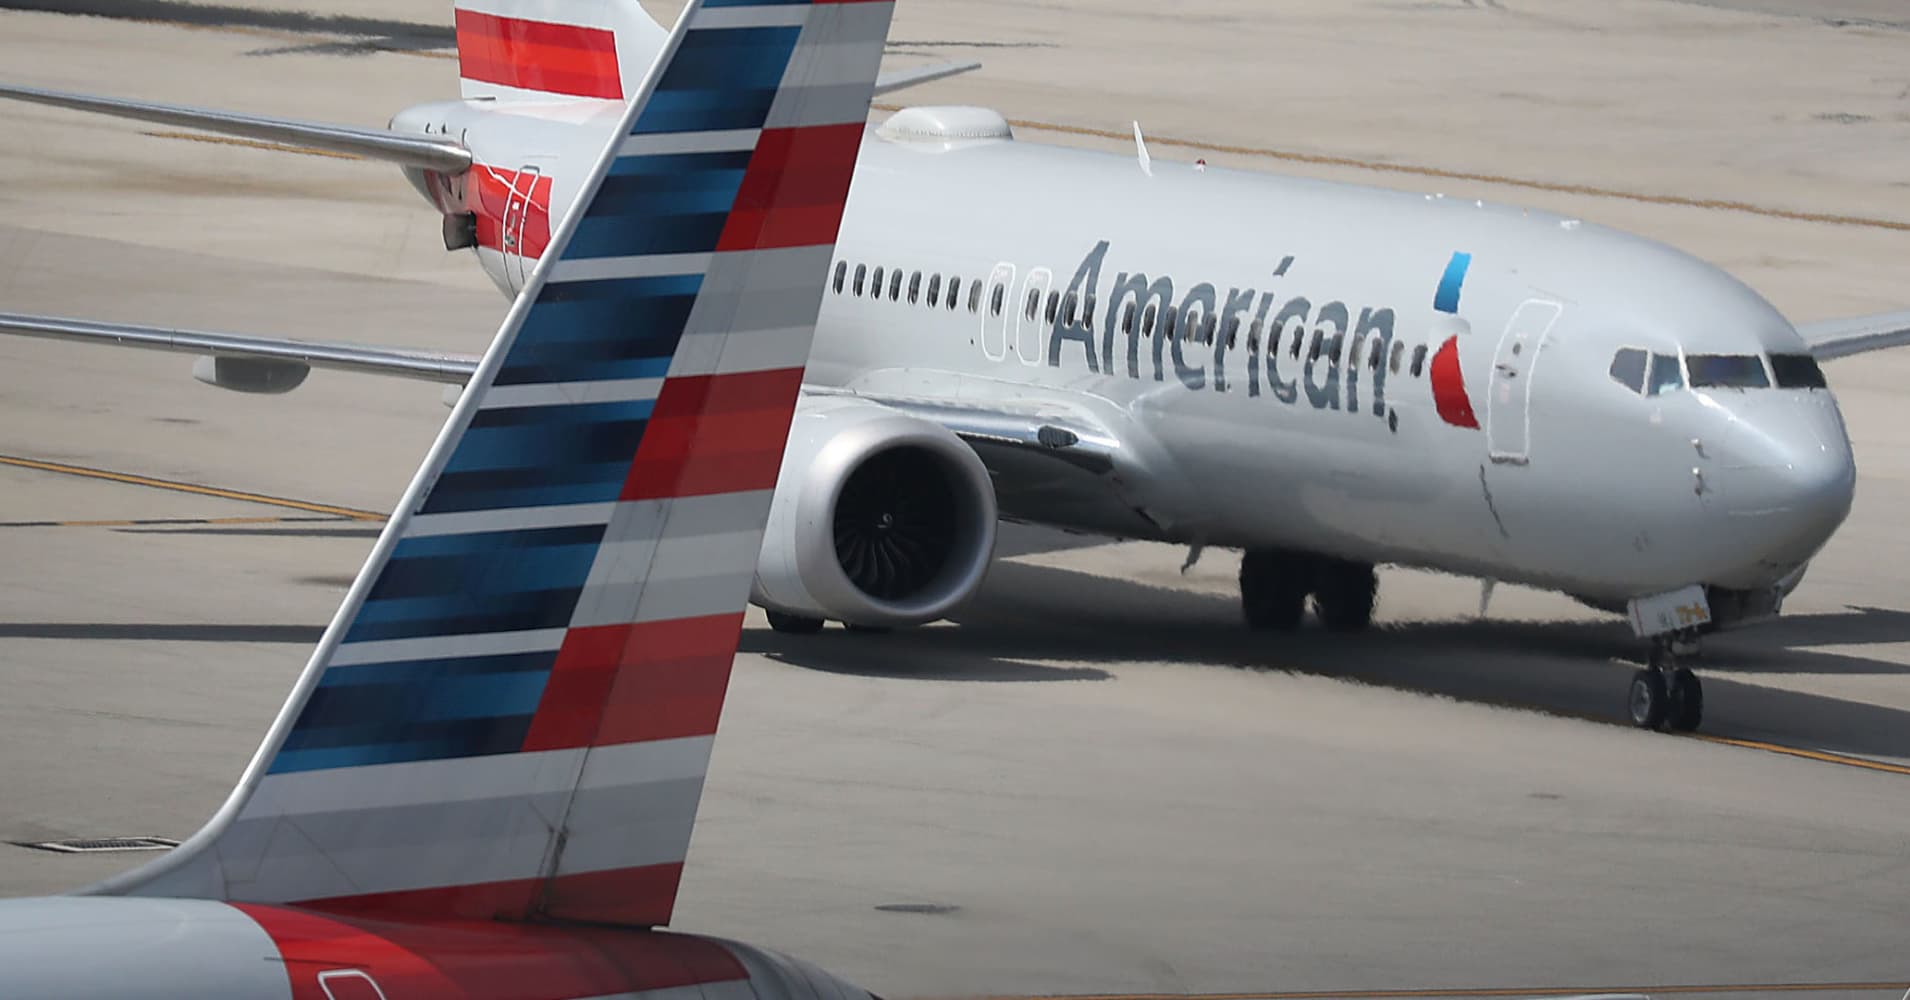 American Airlines extends flight cancellations through June 5 as Boeing 737 Max remains grounded